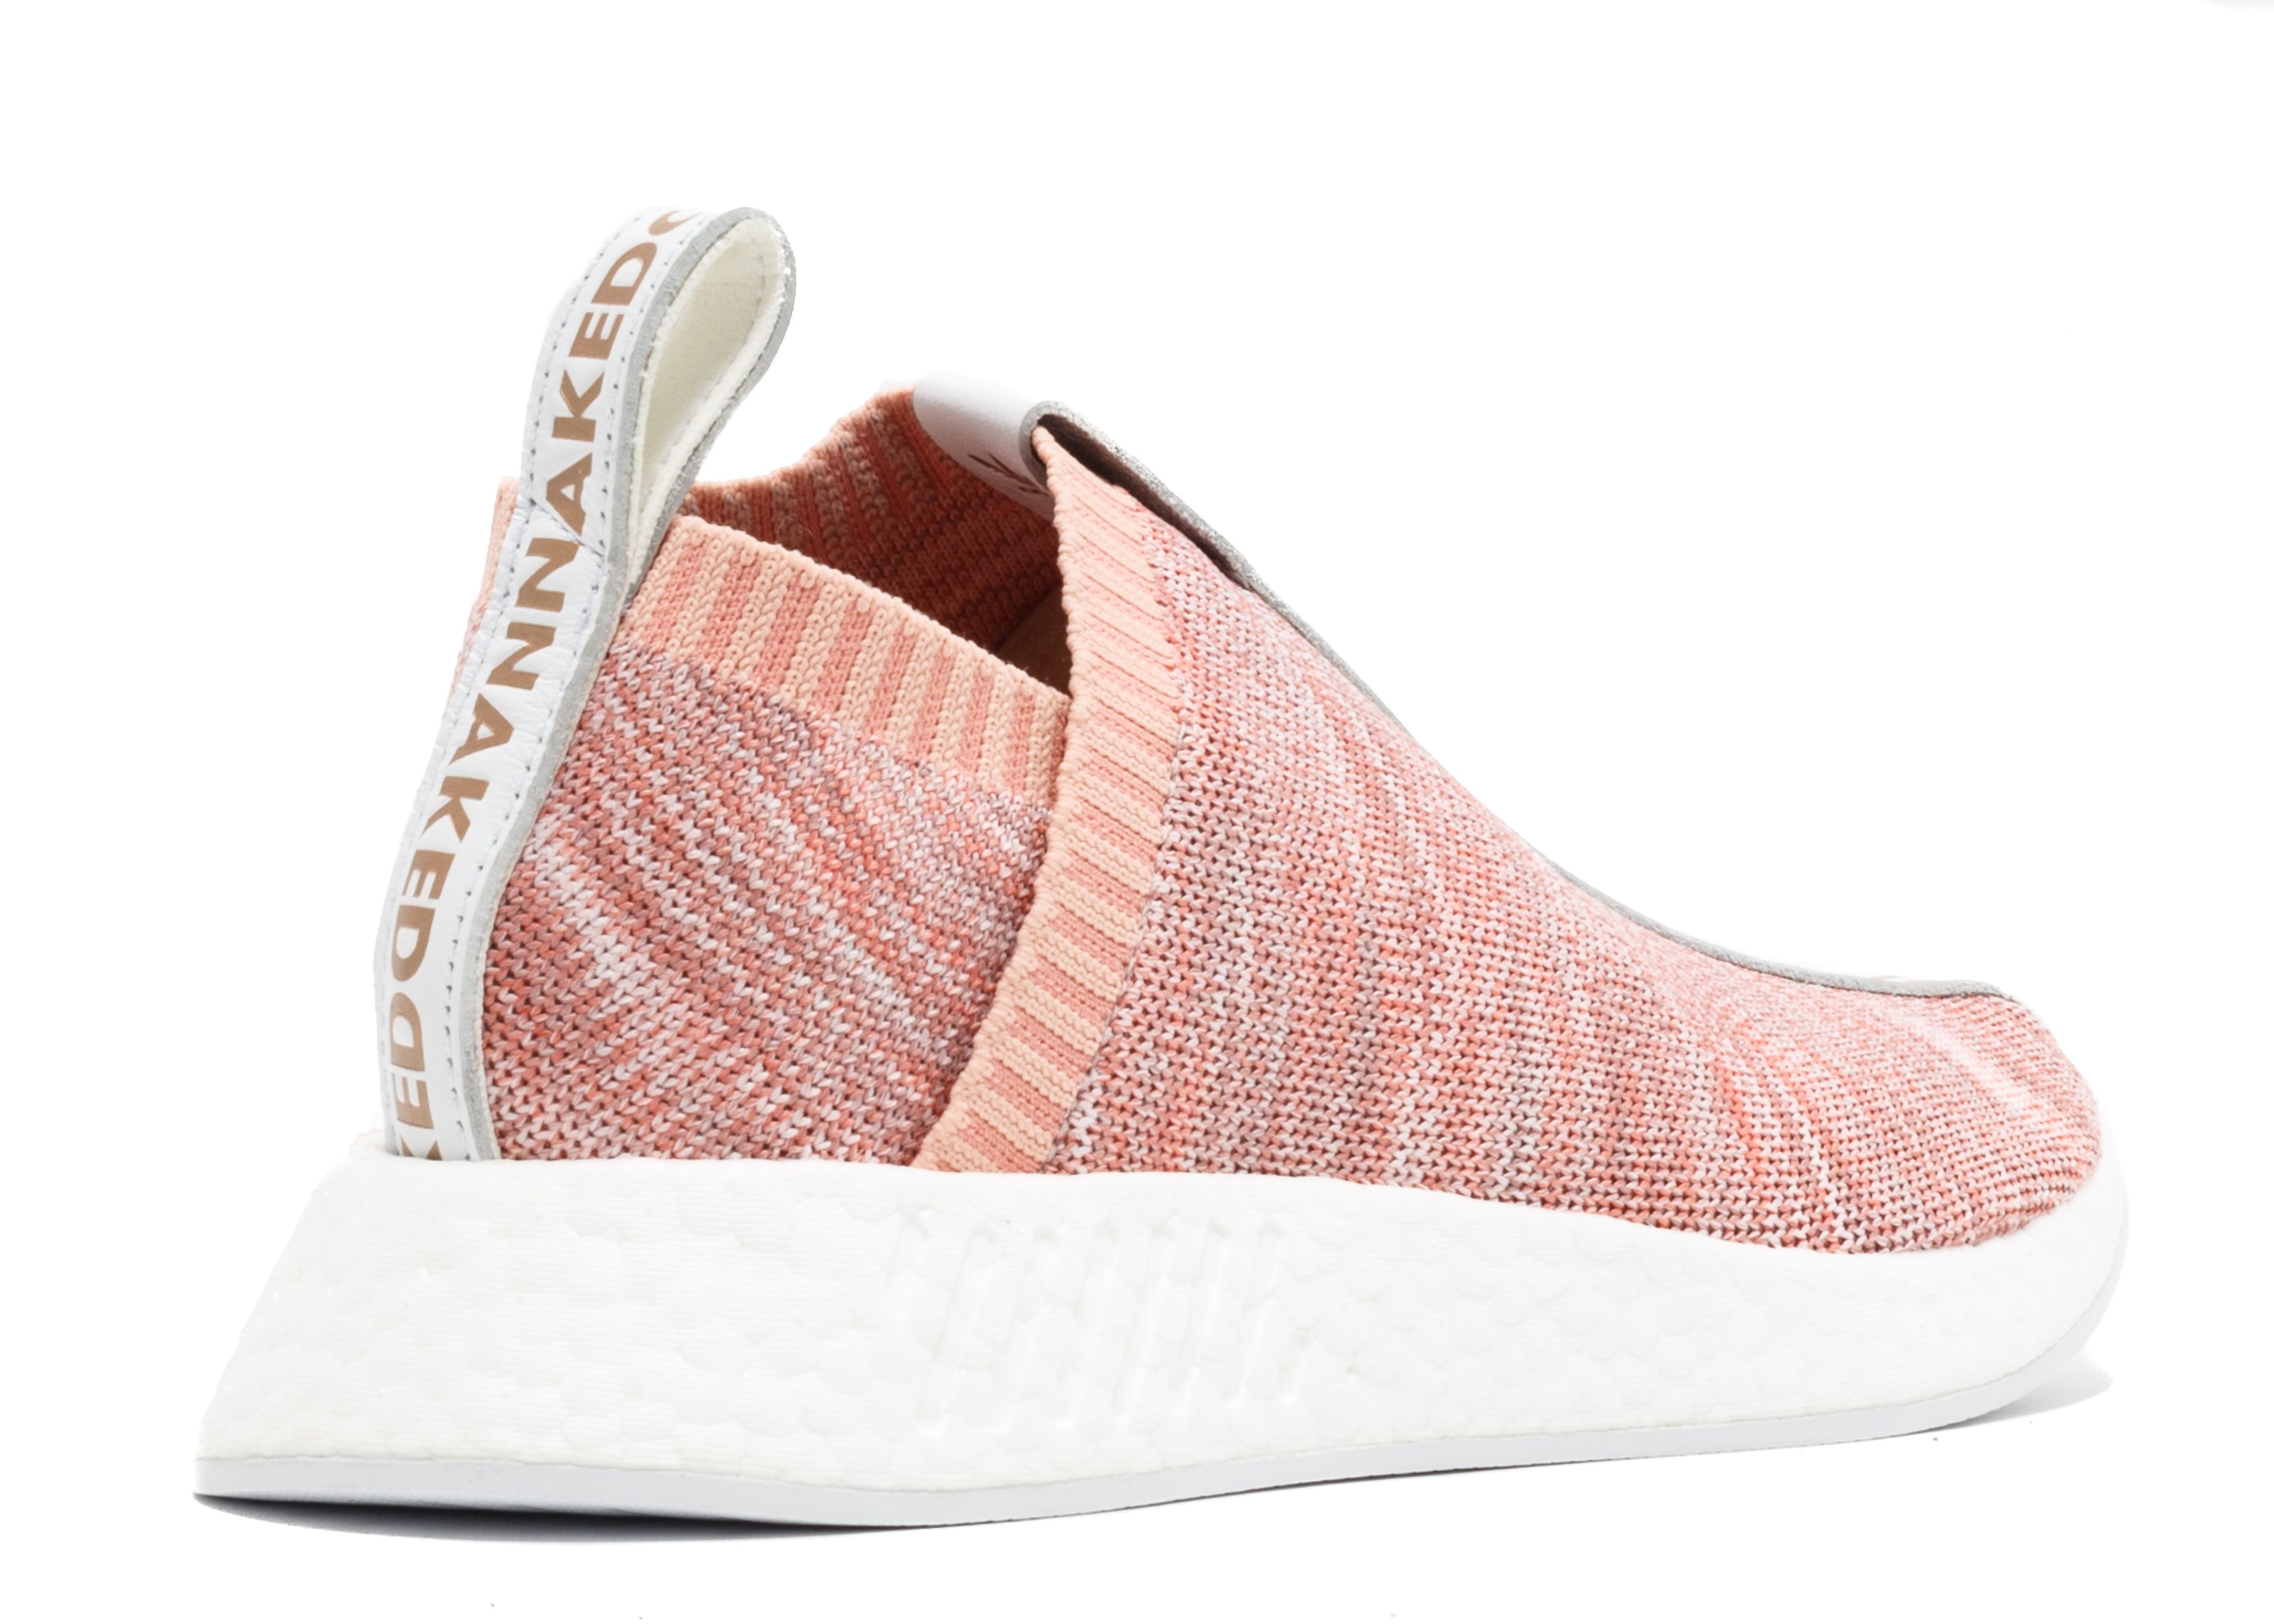 At forurene Preference bacon Kith X Naked X NMD_CS2 Primeknit 'Pink' - Adidas - BY2596 - pink/white |  Flight Club